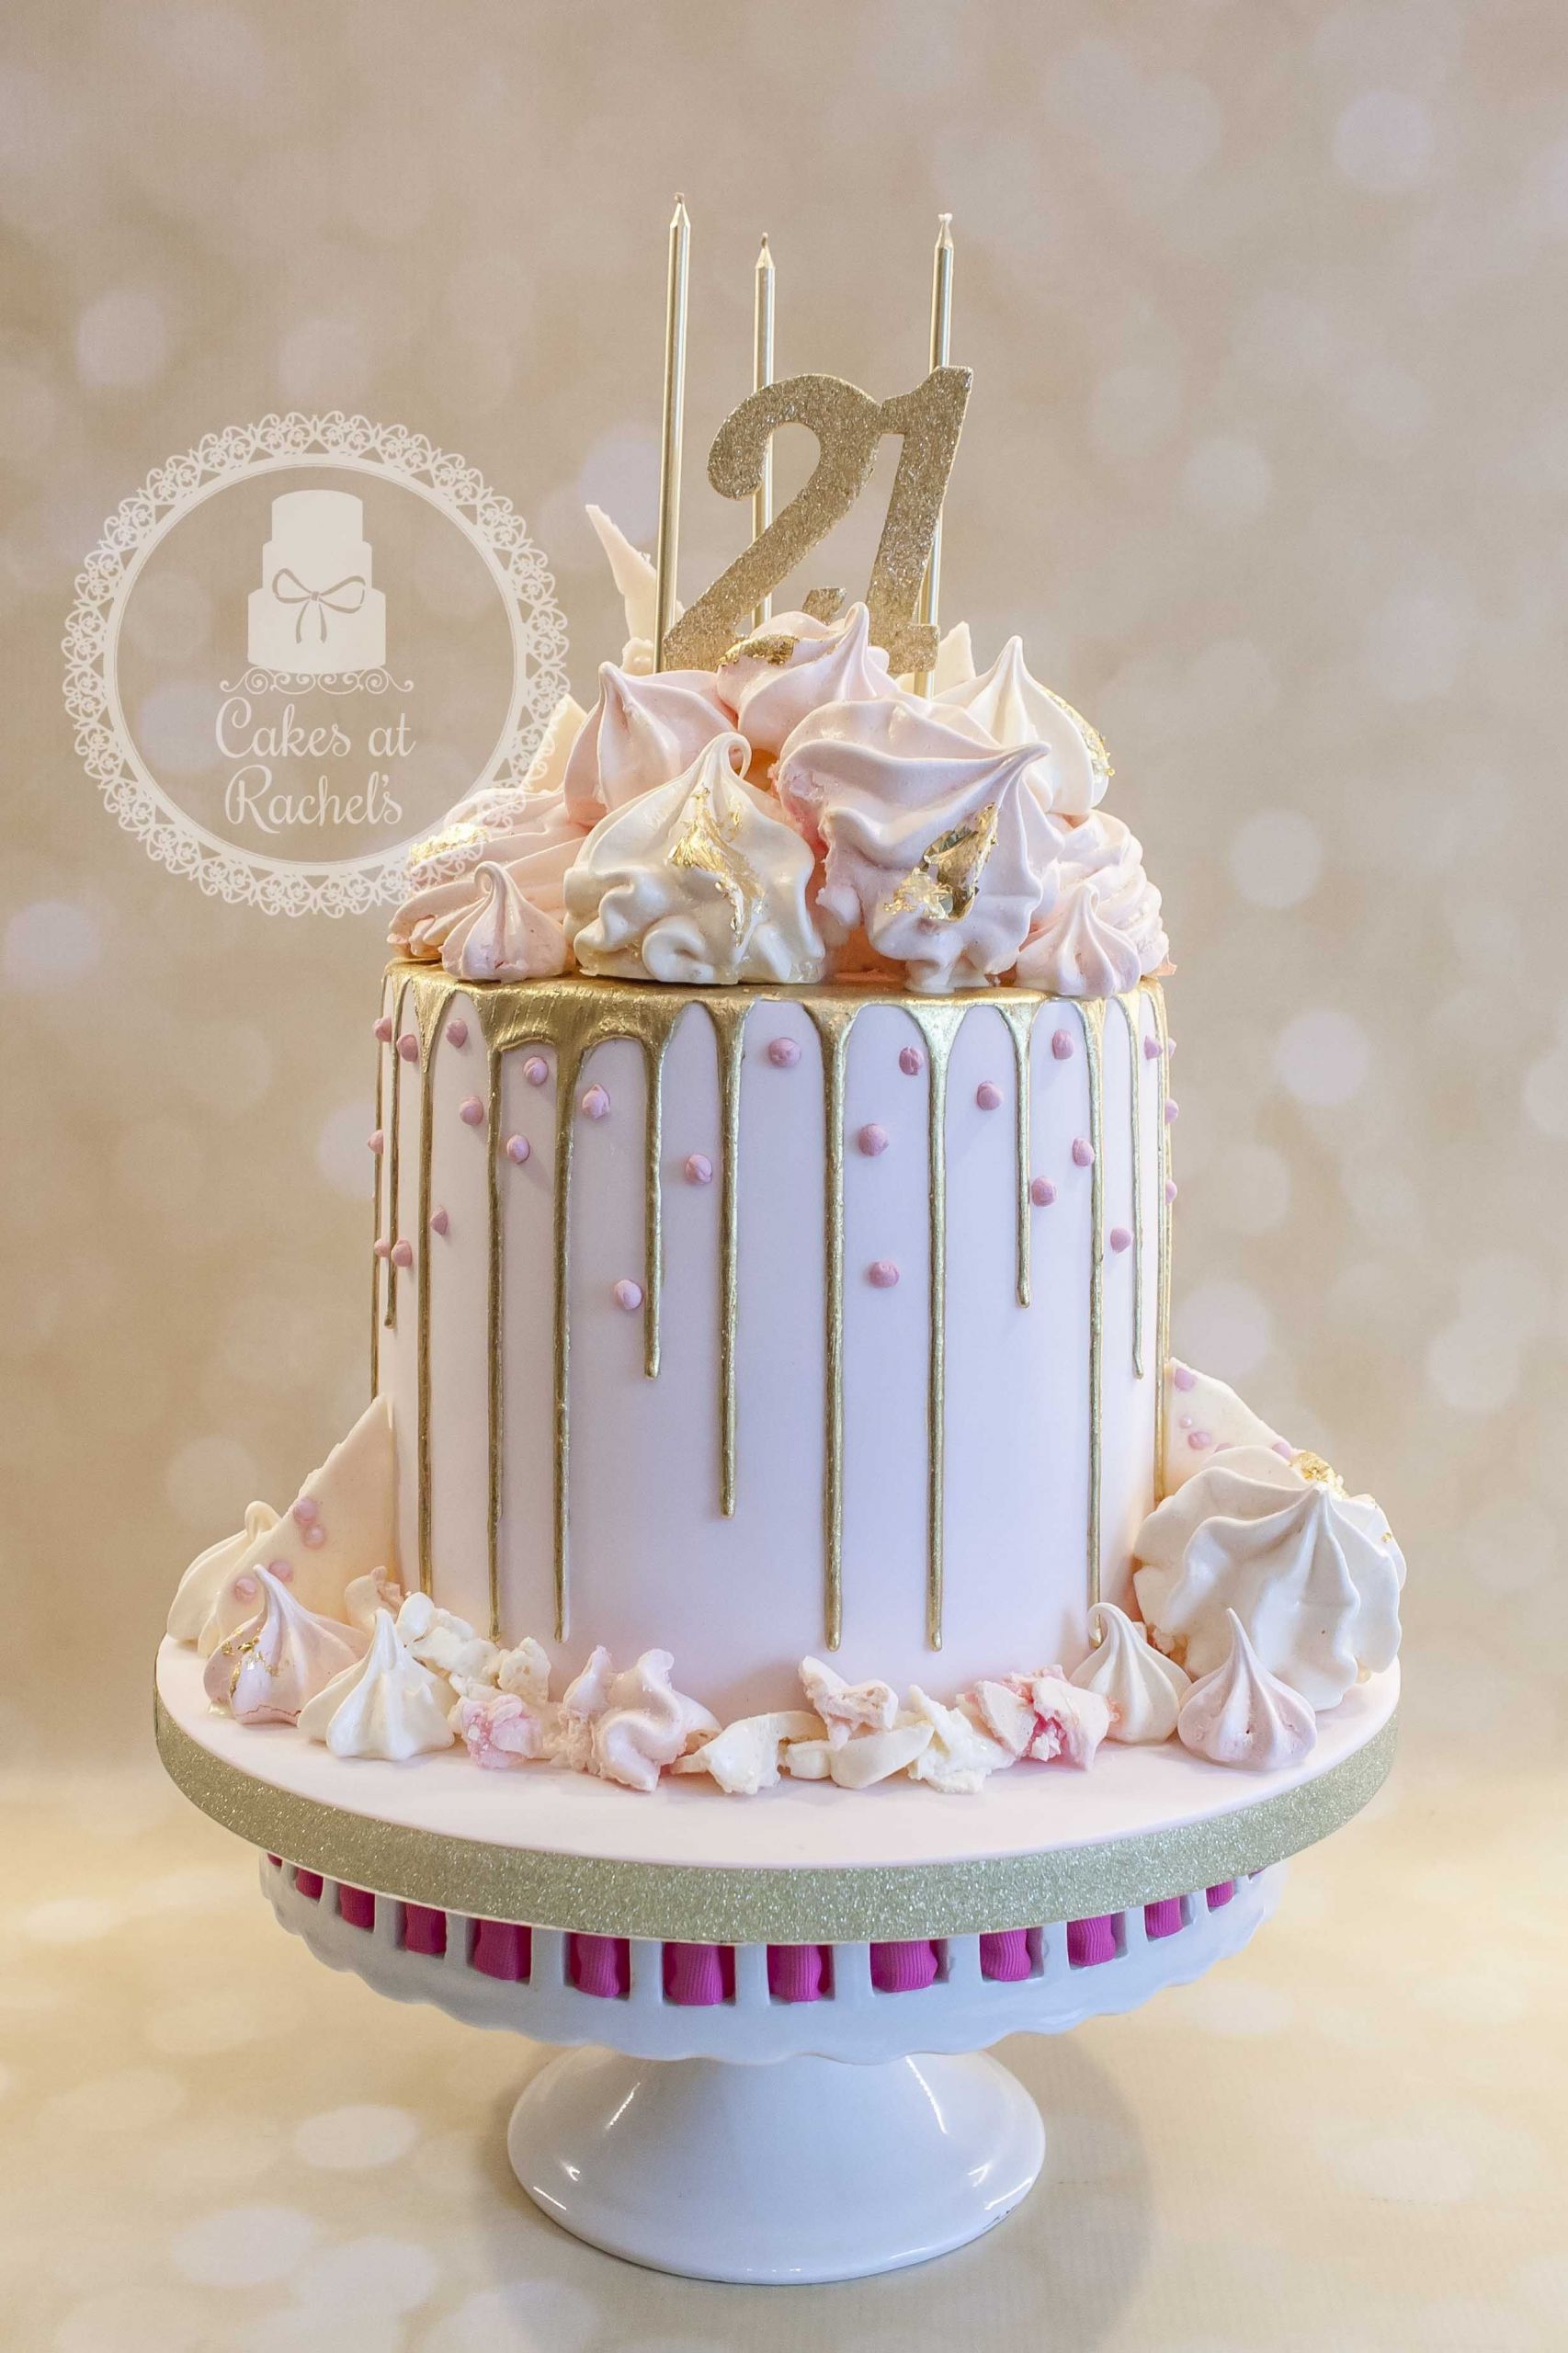 21st Birthday Cake Decorations
 Pastel pink and gold drip cake for Francesca s 21st